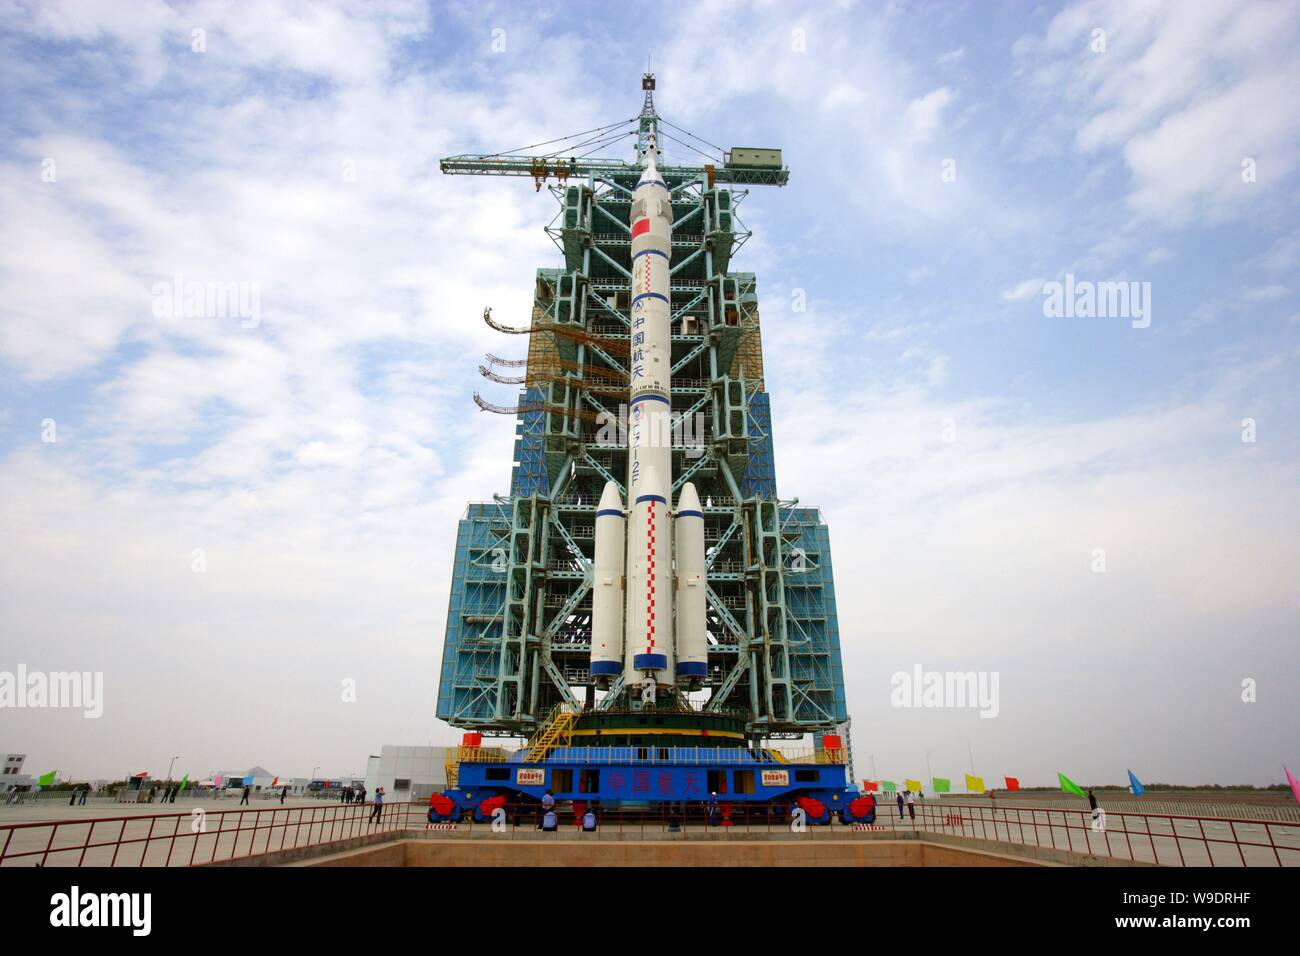 Chinese aeronautical scientists and workers fix a Long March 2F (CZ-2F) space rocket caryying the Shenzhou VII manned spacecraft on a launch pad at Ji Stock Photo